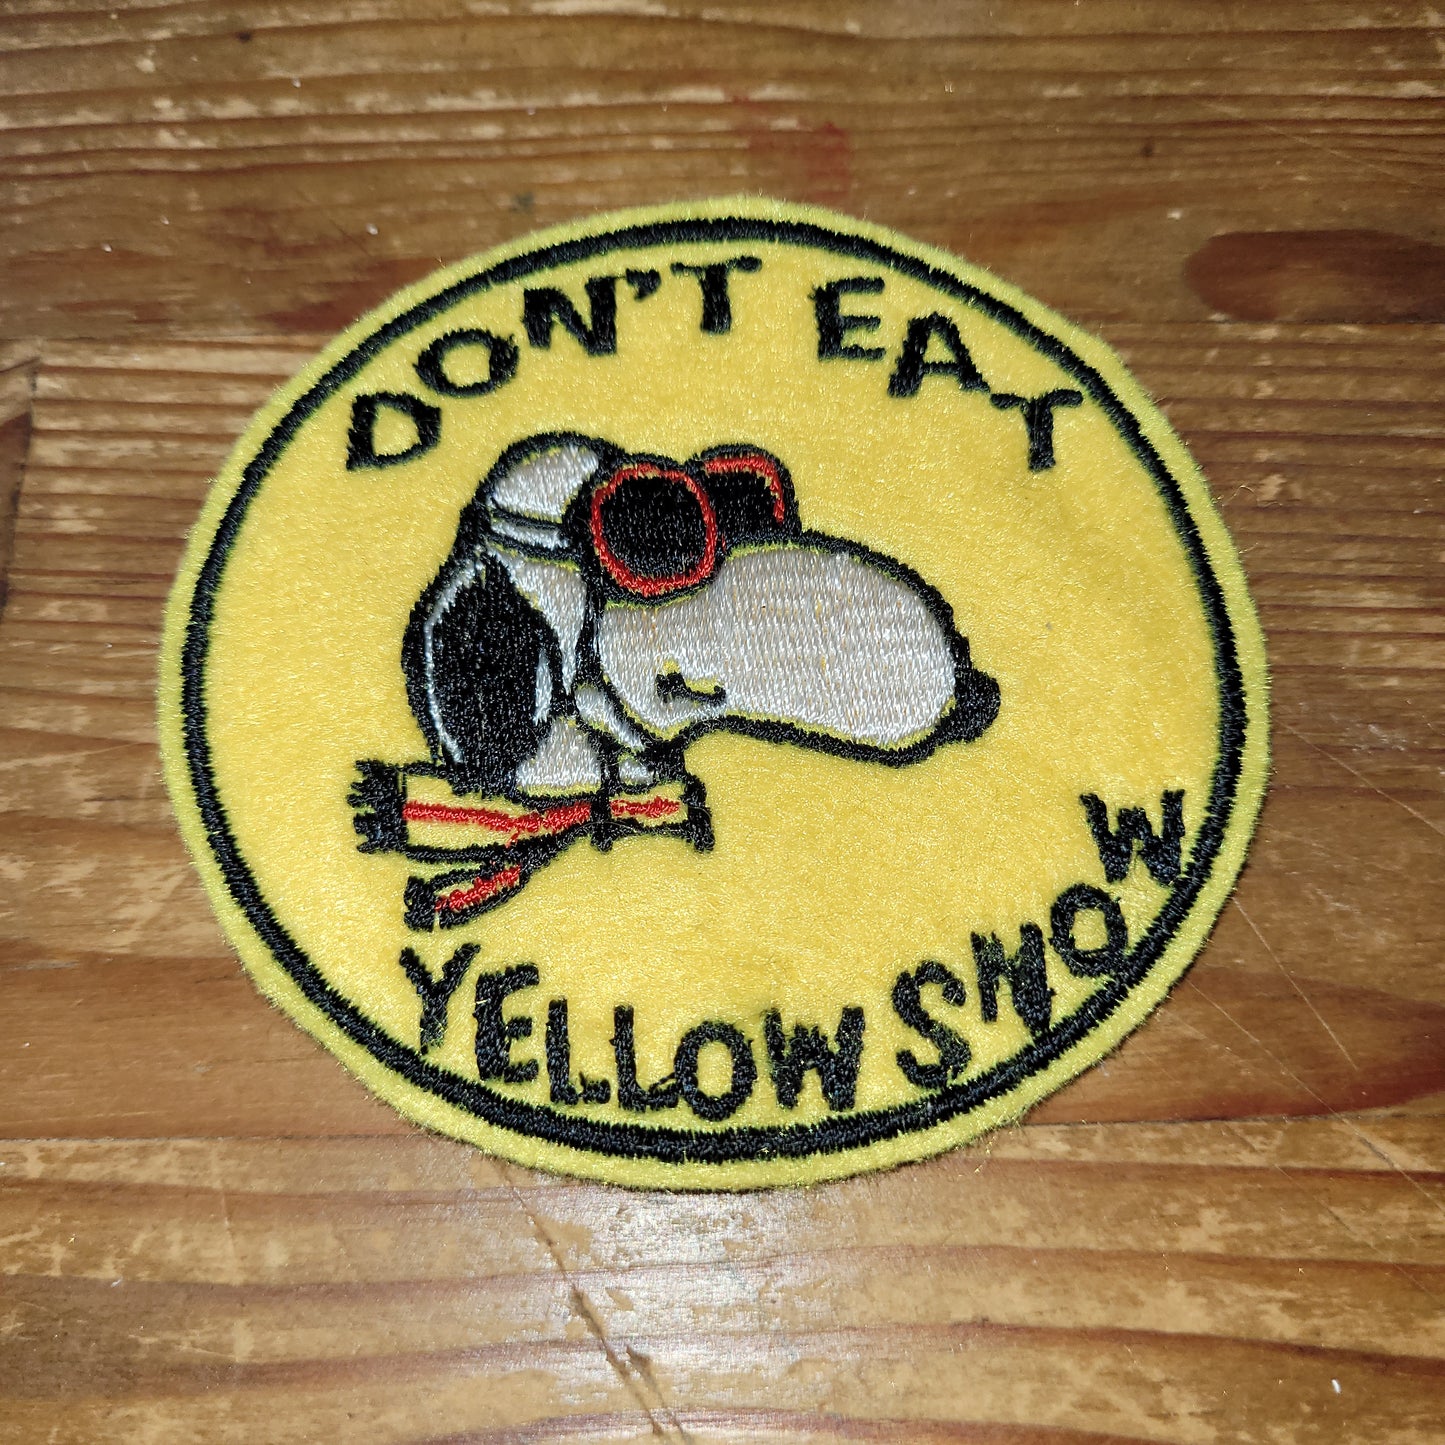 Snoopy "Don't Eat Yellow Snow"